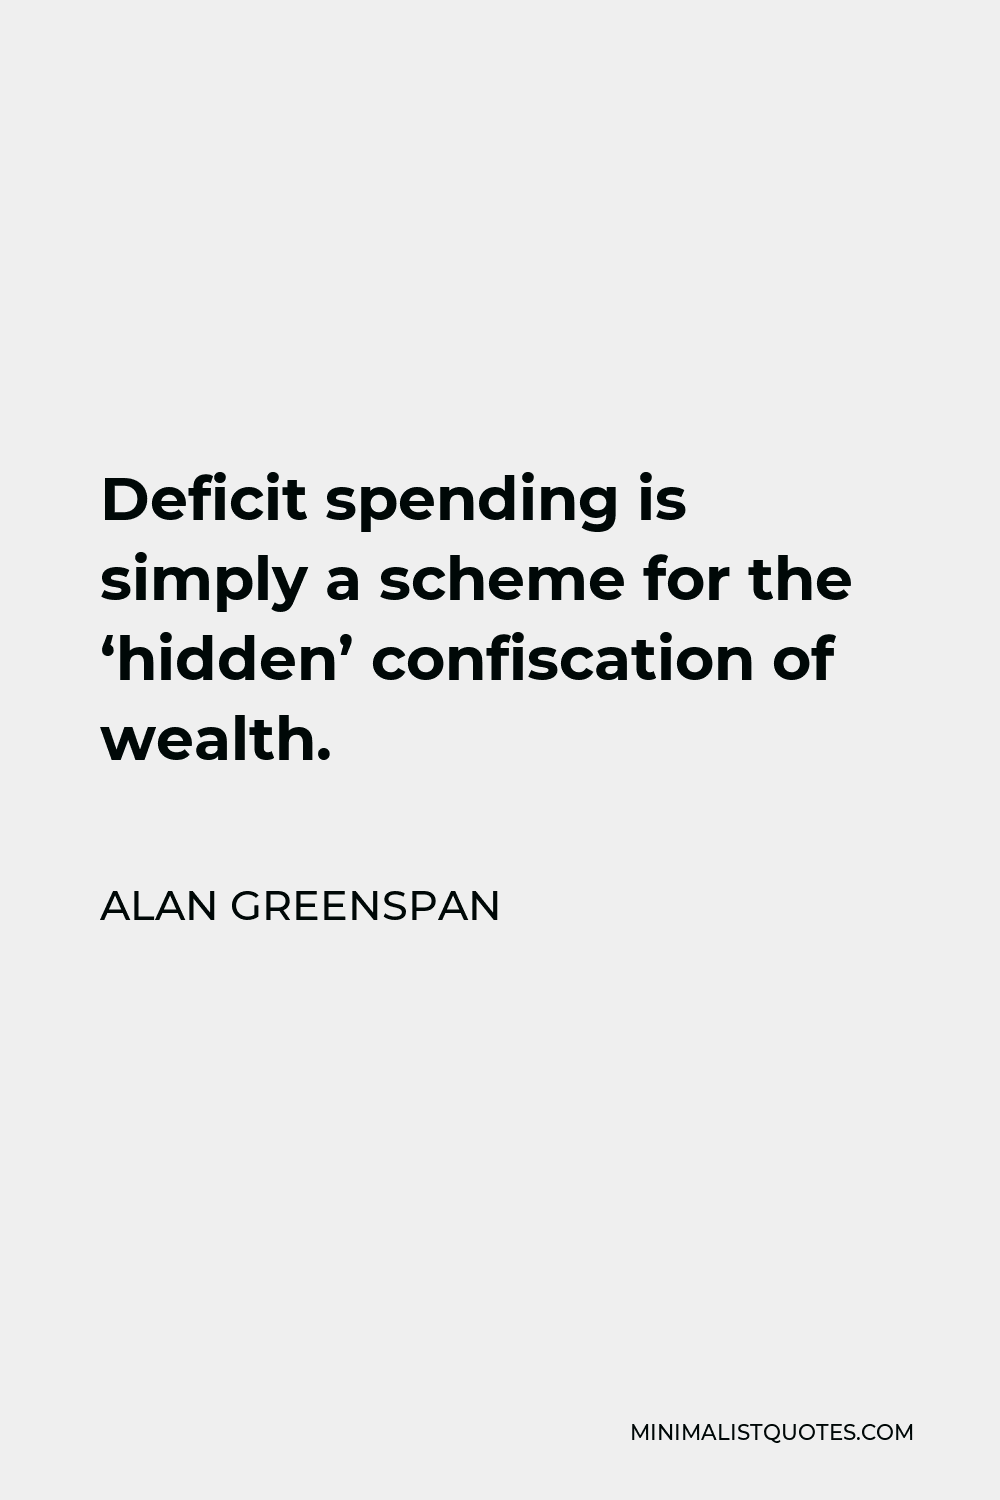 Alan Greenspan Quote - Deficit spending is simply a scheme for the confiscation of wealth.If I seem unduly clear to you, you must have misunderstood what I said.